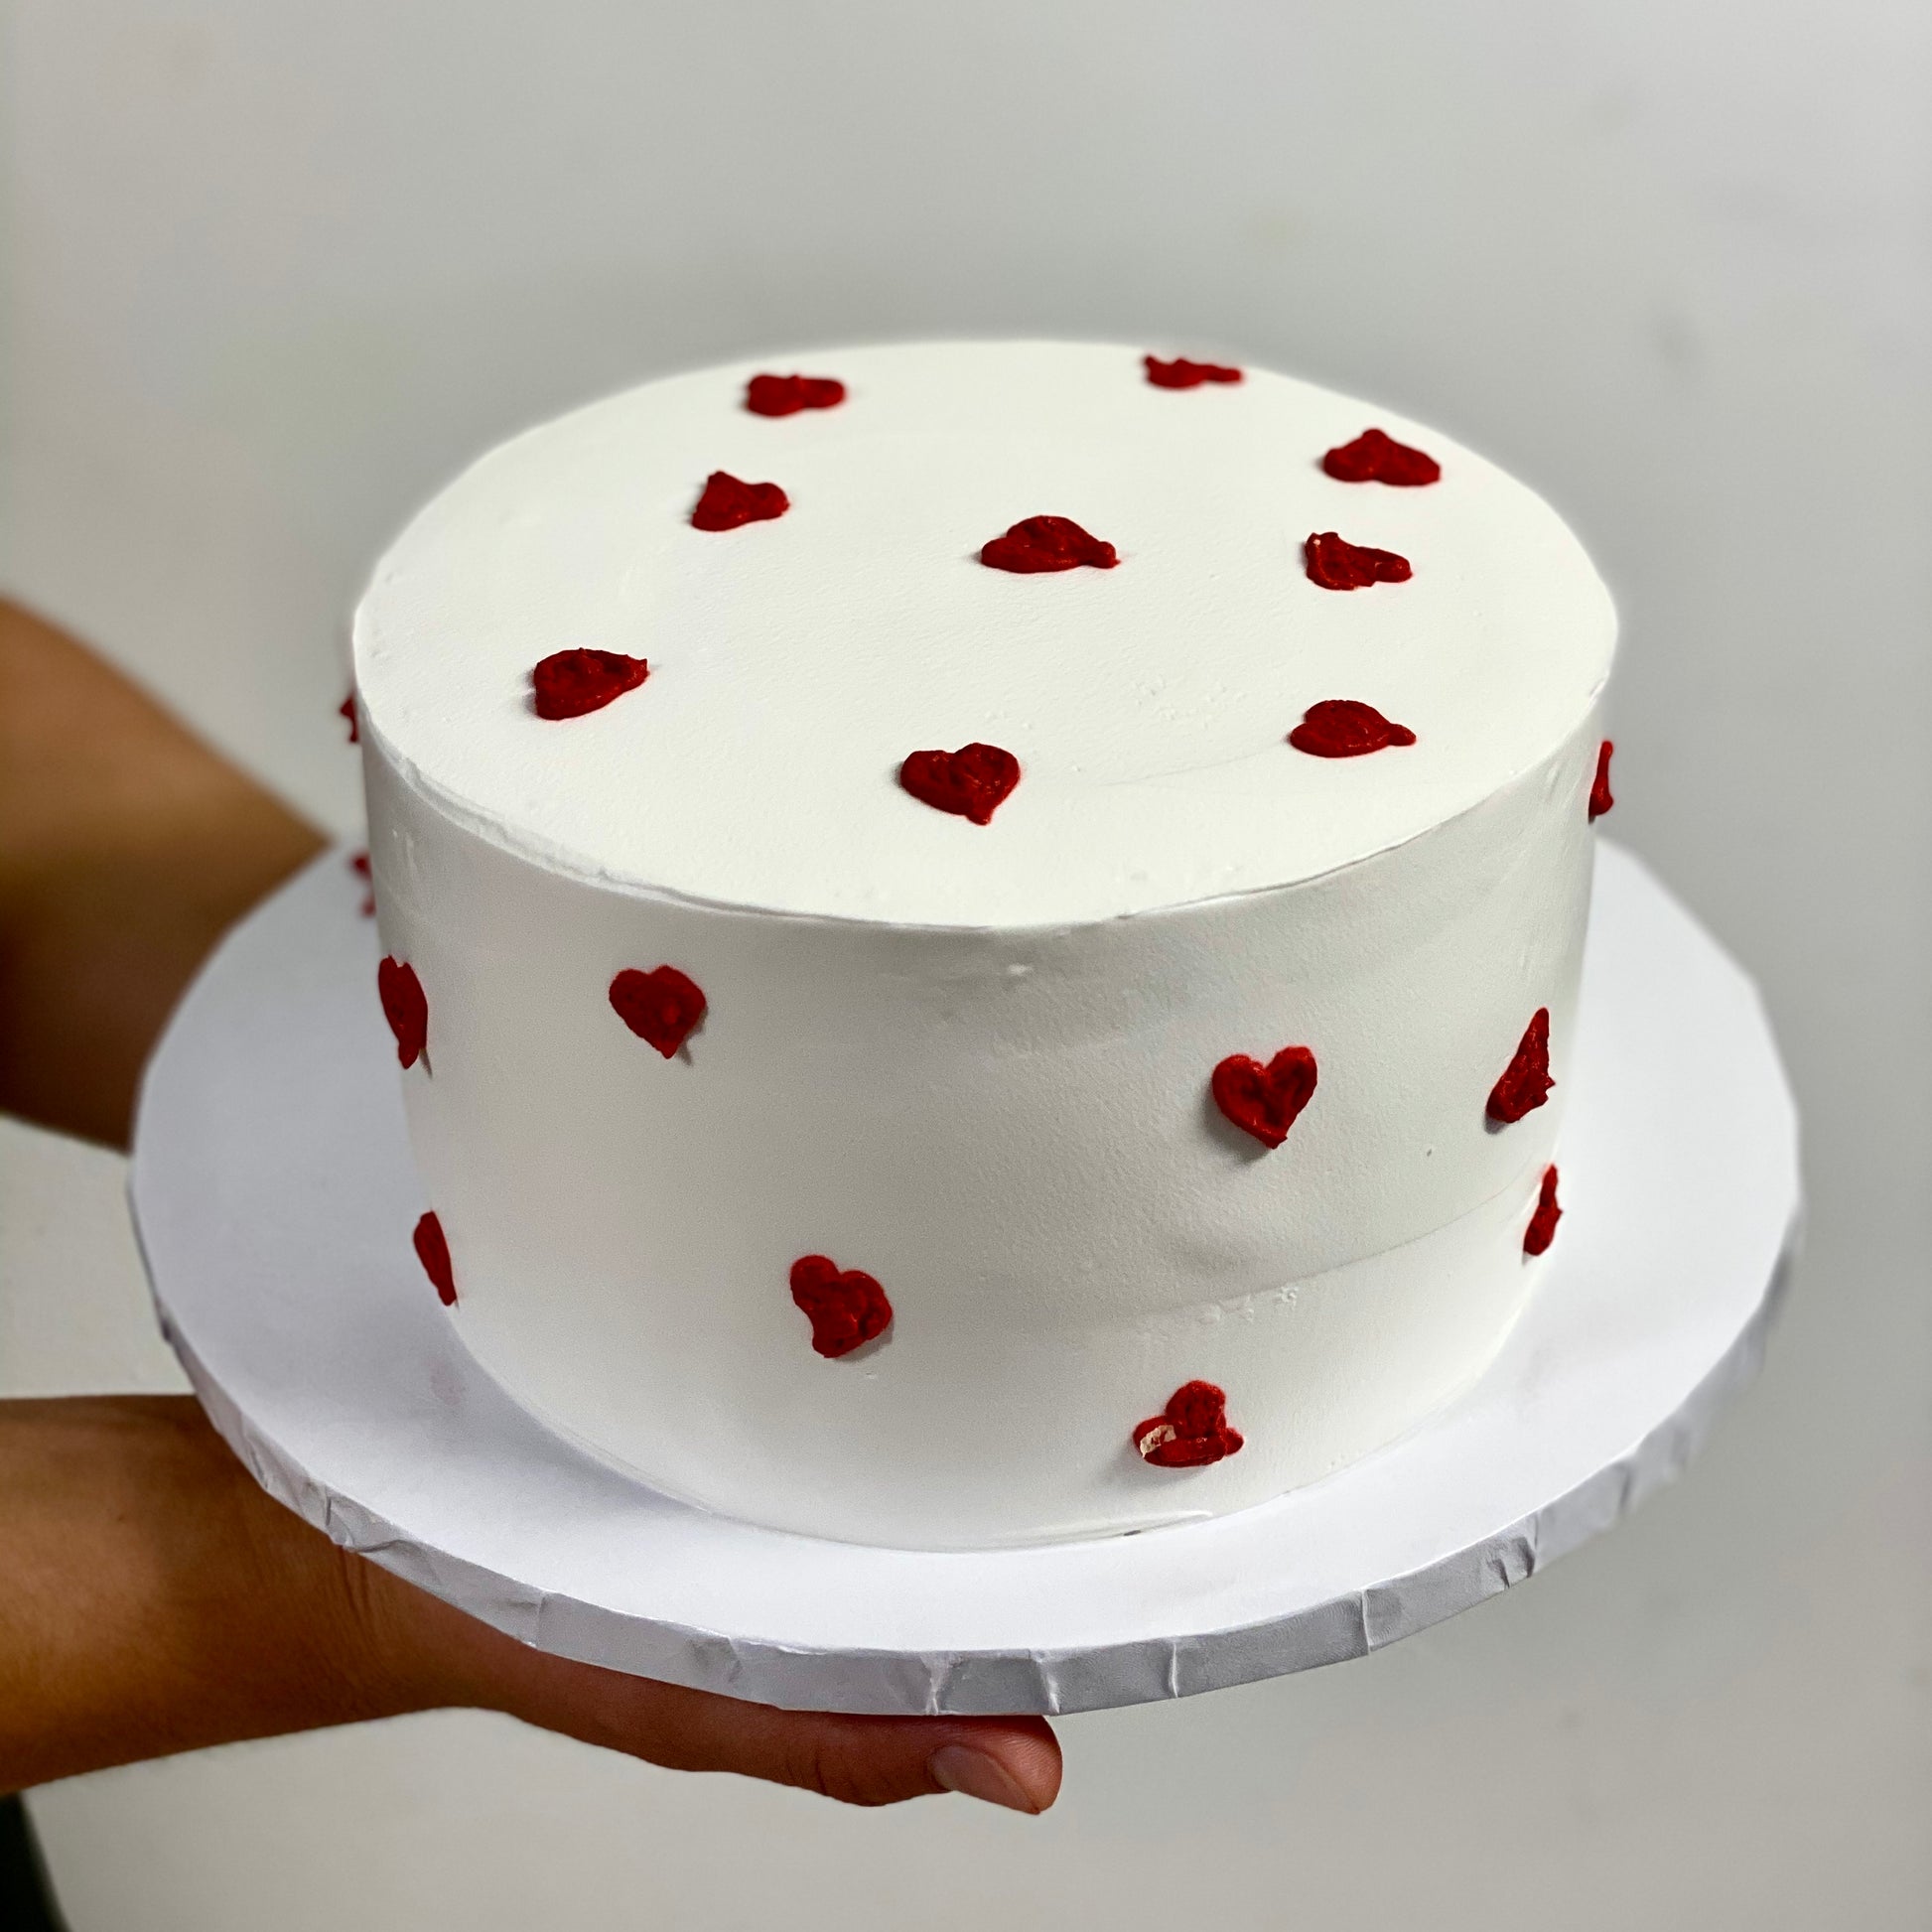 White cake with tiny red hearts